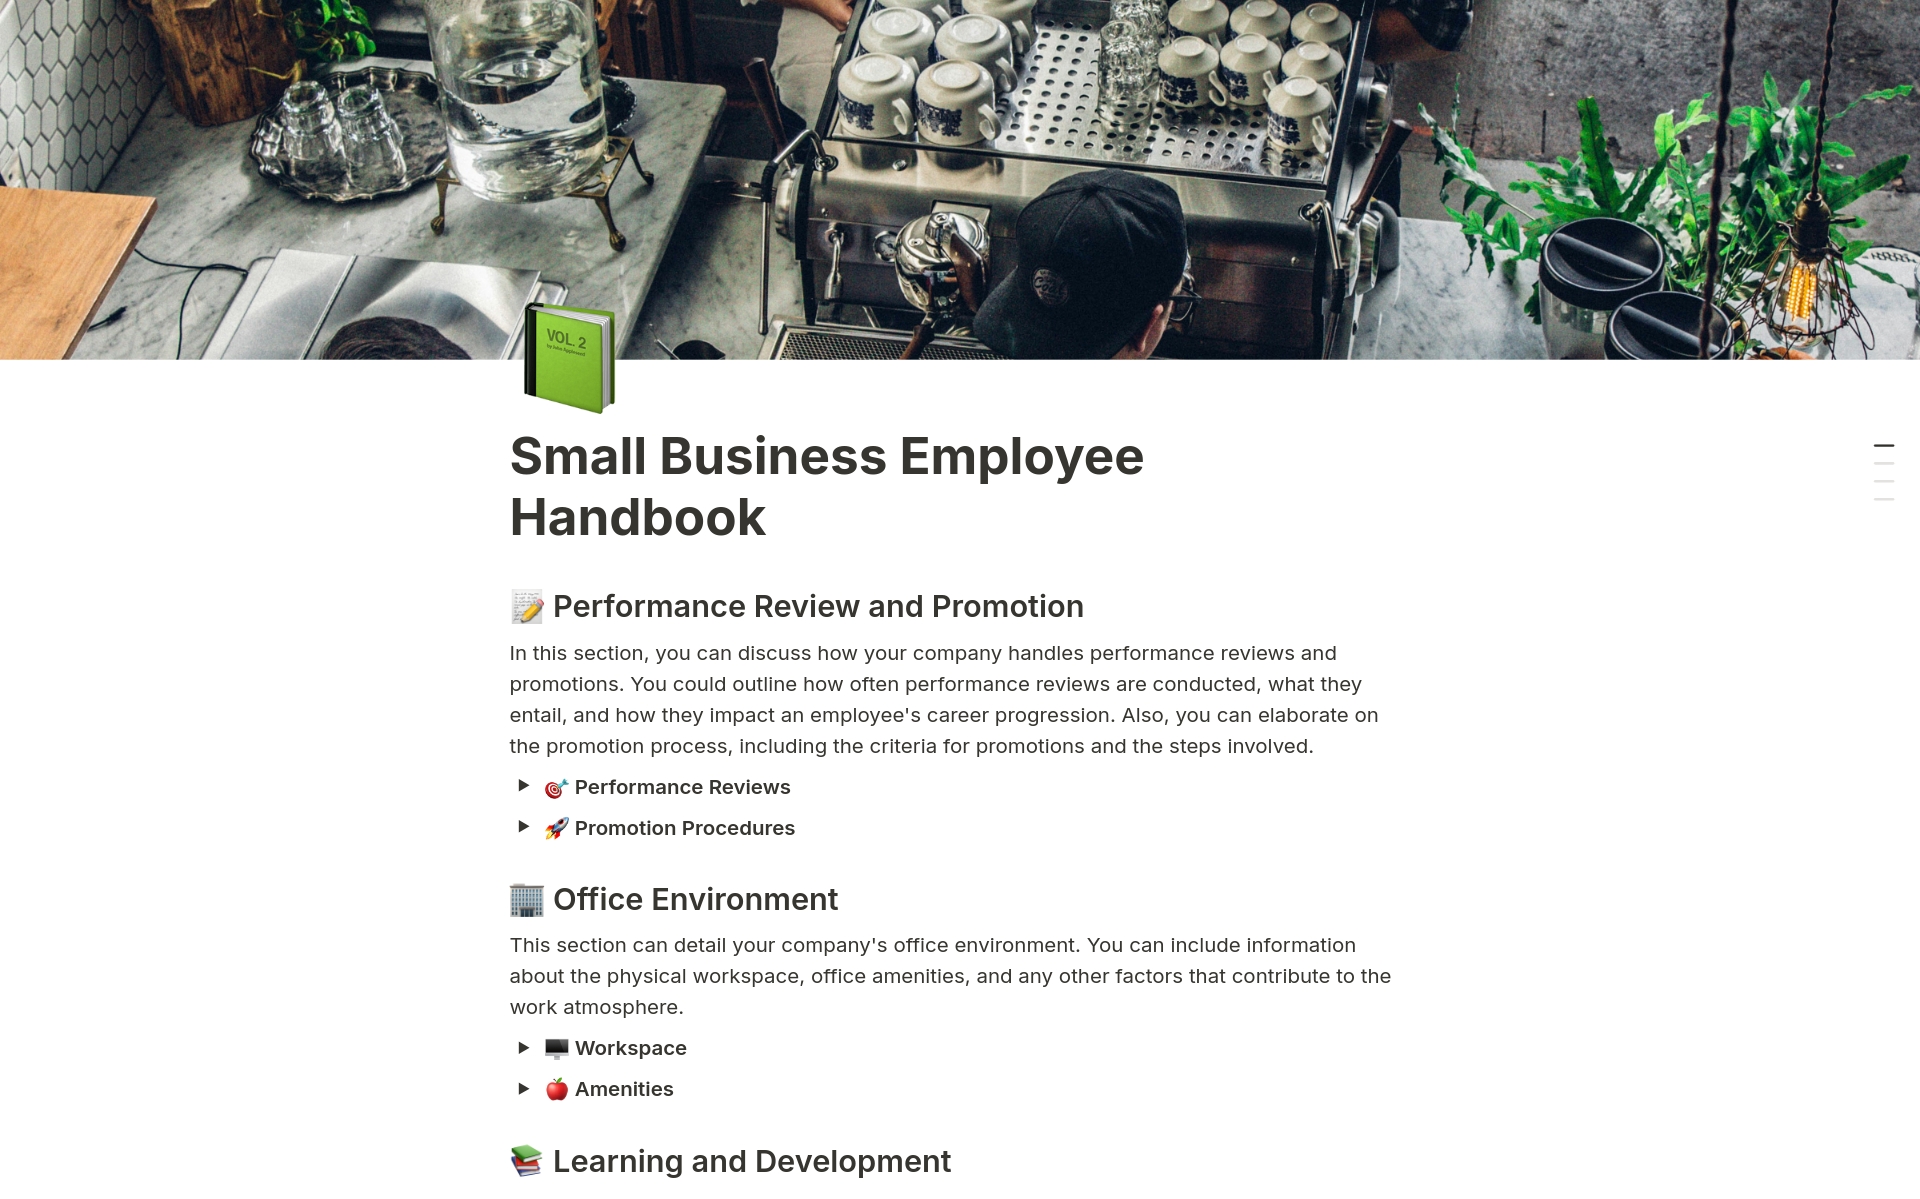 A detailed handbook for small business employees, covering essential policies and small team collaboration.